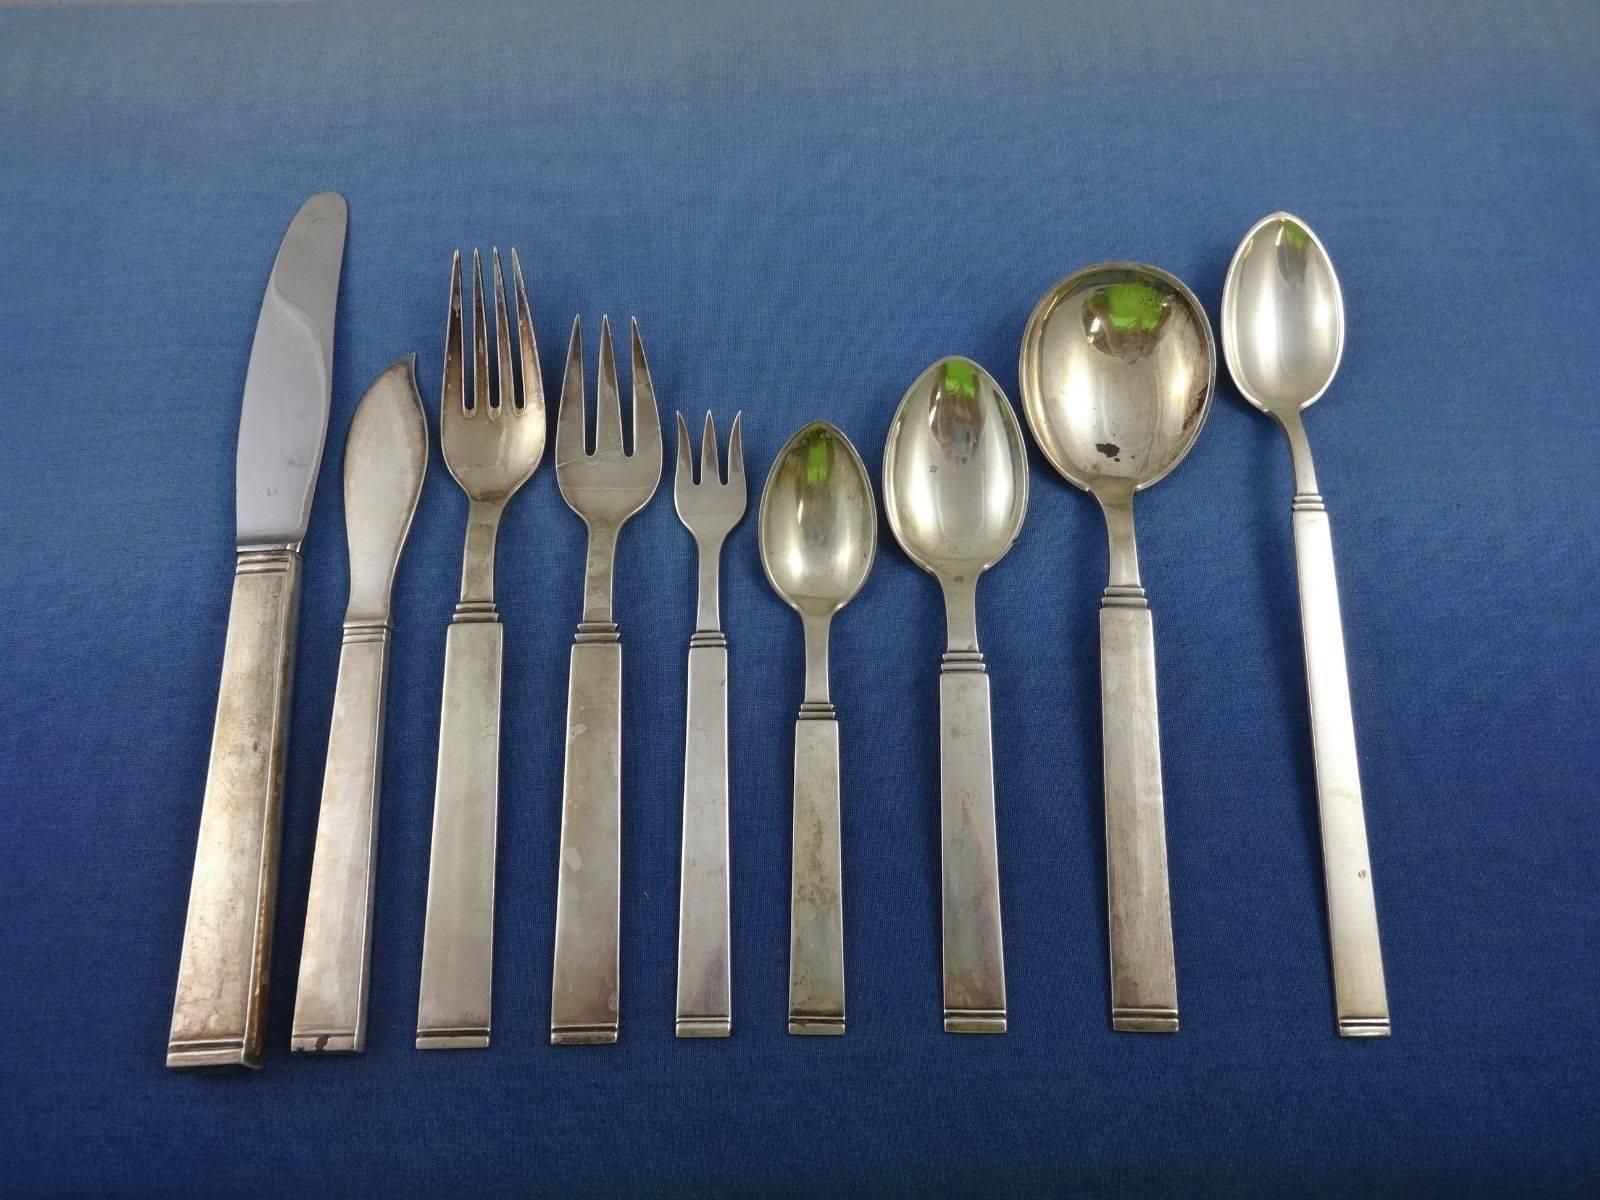 Funkis by Sorensen Danish sterling silver flatware set of 83 pieces. This set includes:

Eight knives, (7) - 8 3/8